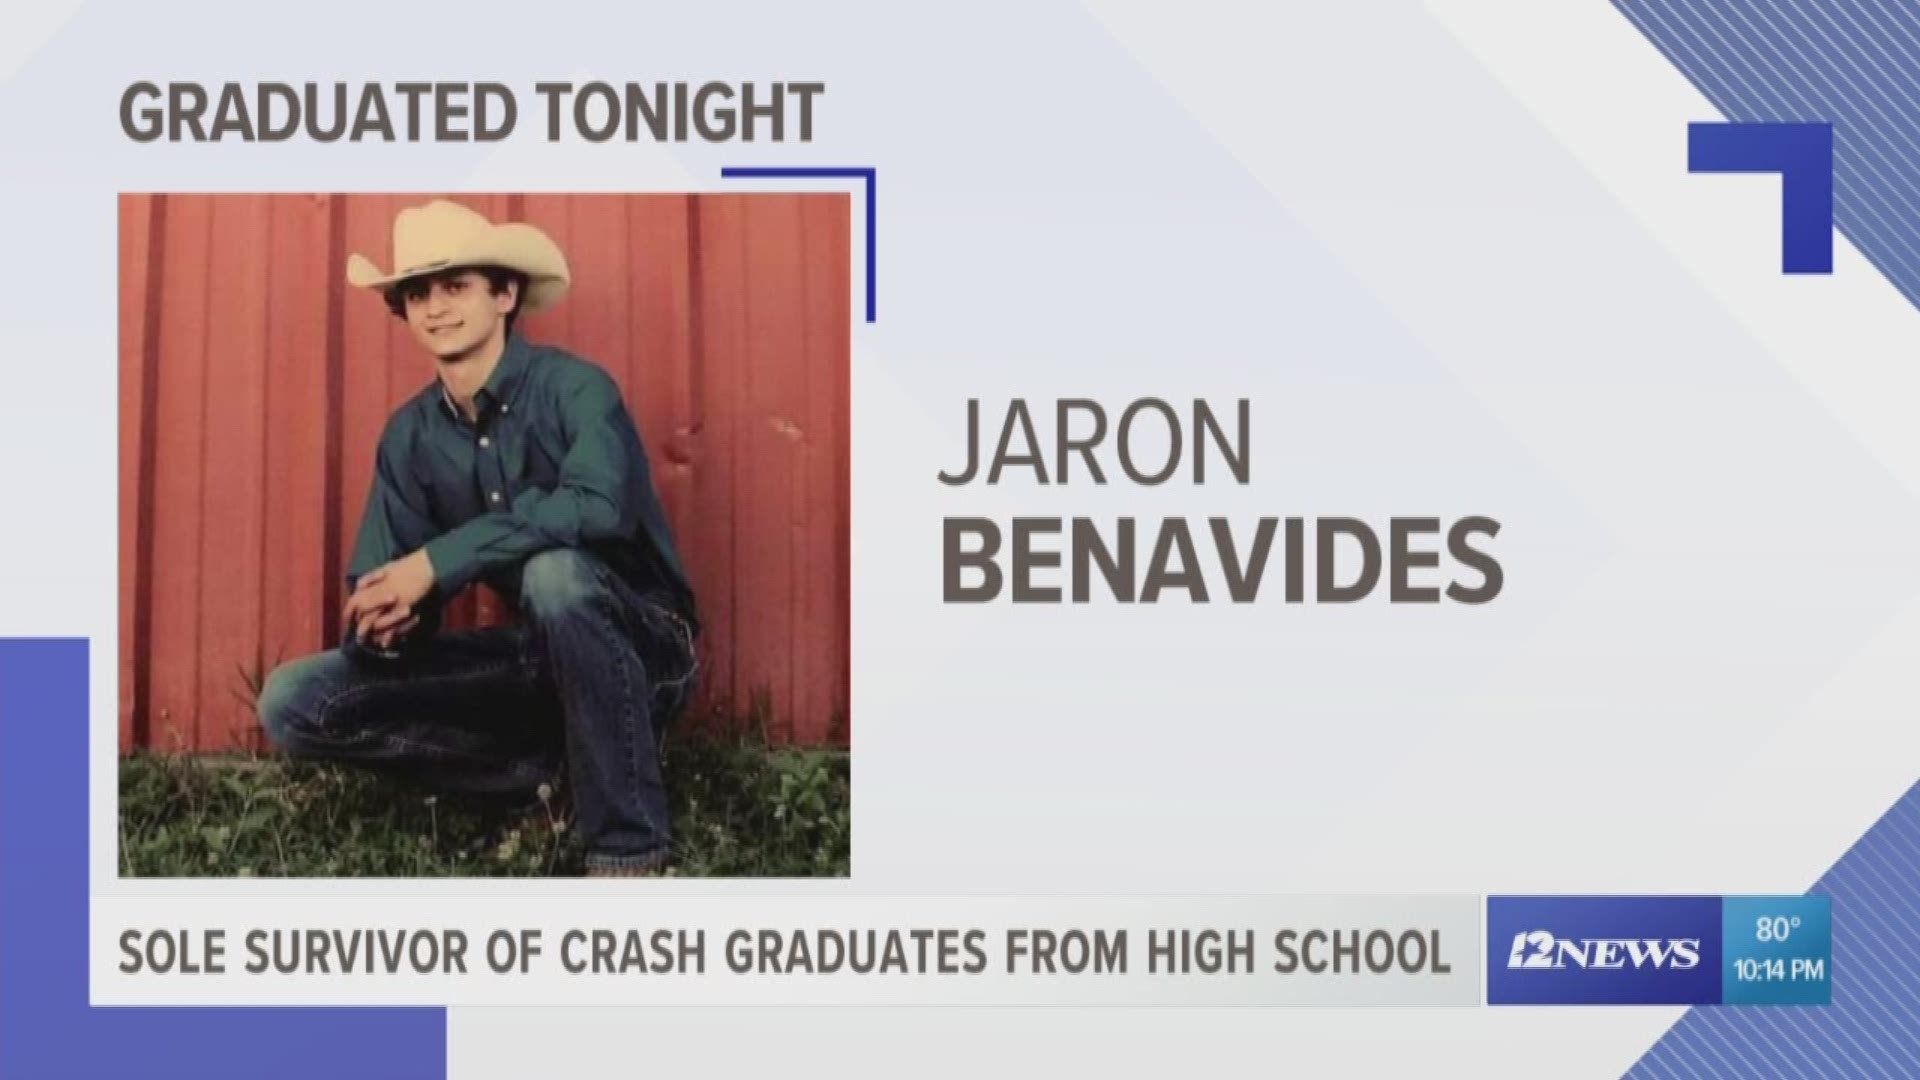 Despite multiple surgeries and a long recovery, Jaron Benavides finished his senior year.